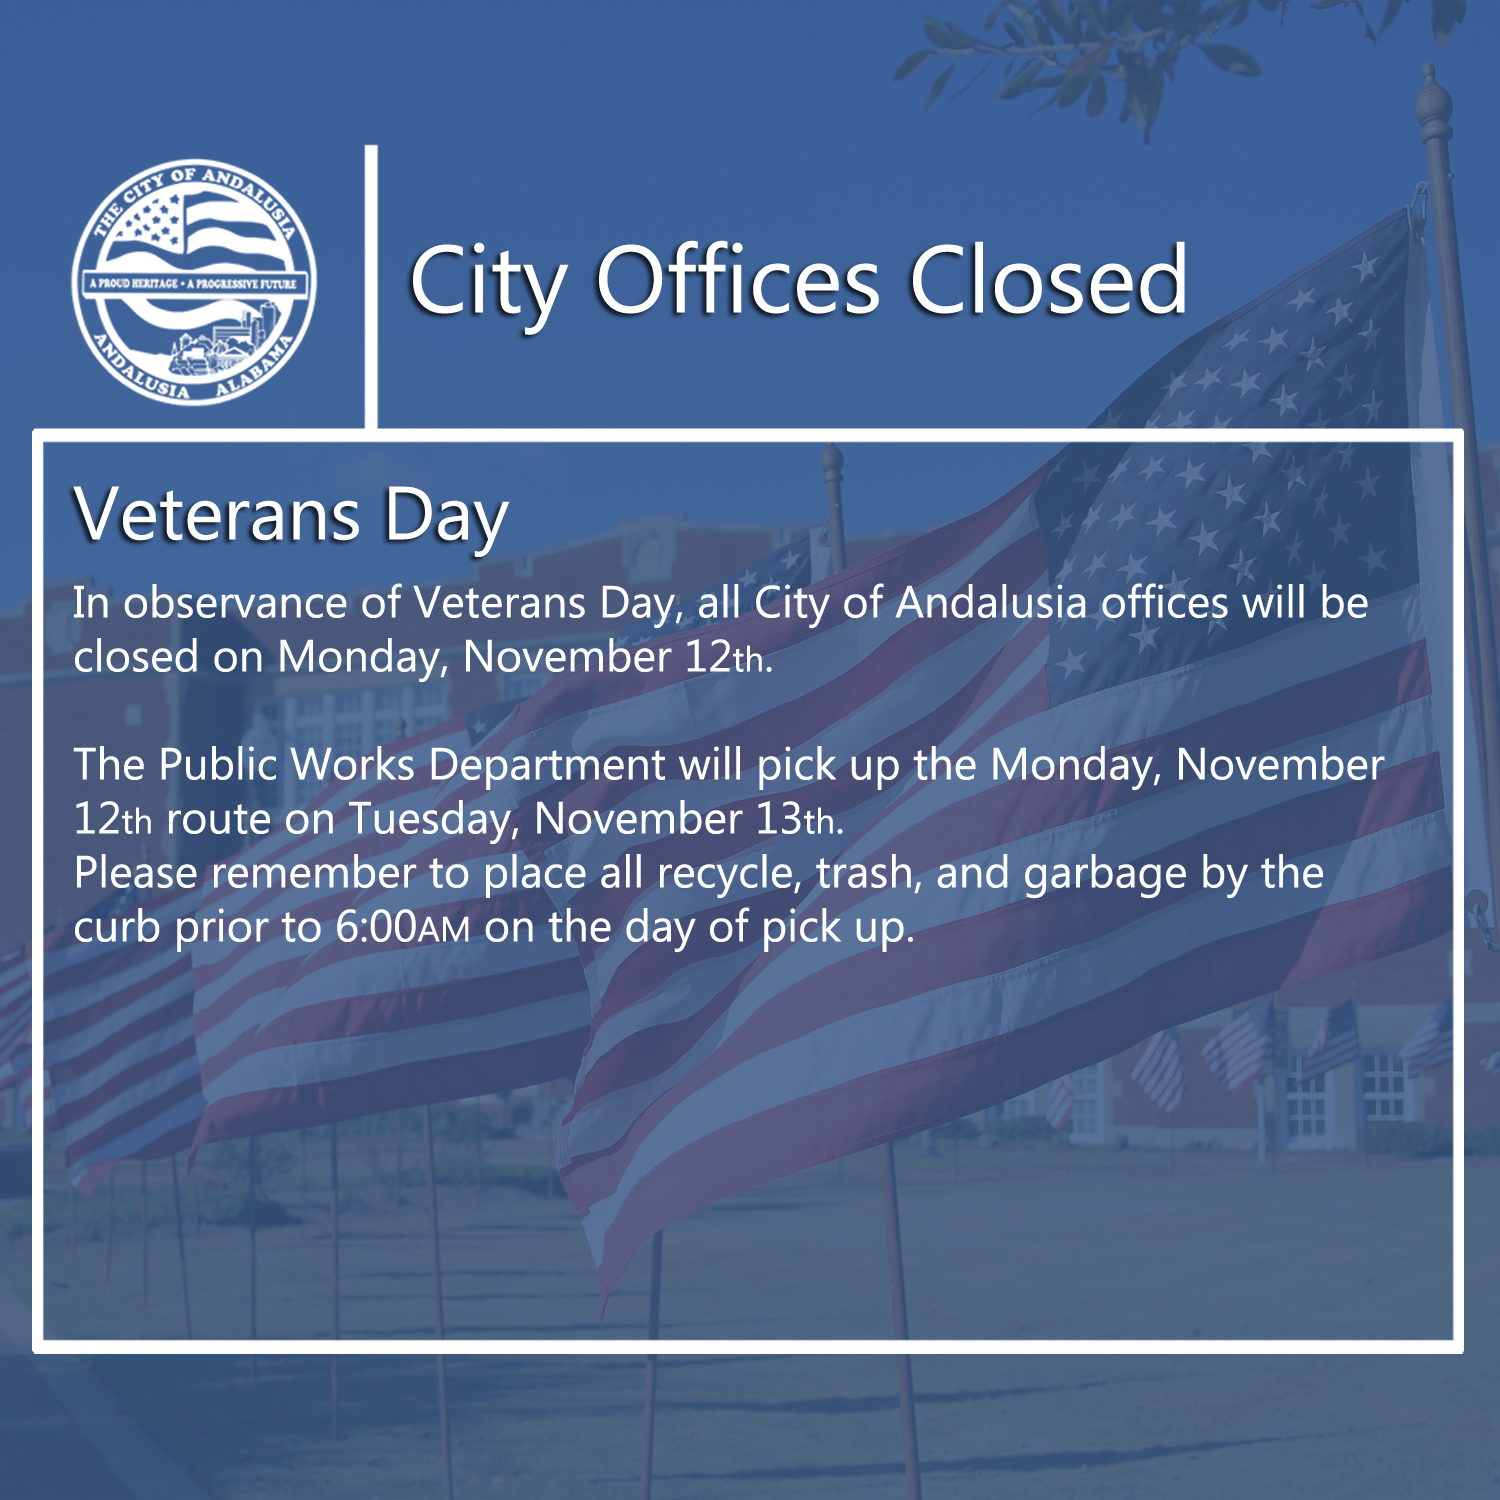 Facebook City Offices Closed Veterans Day